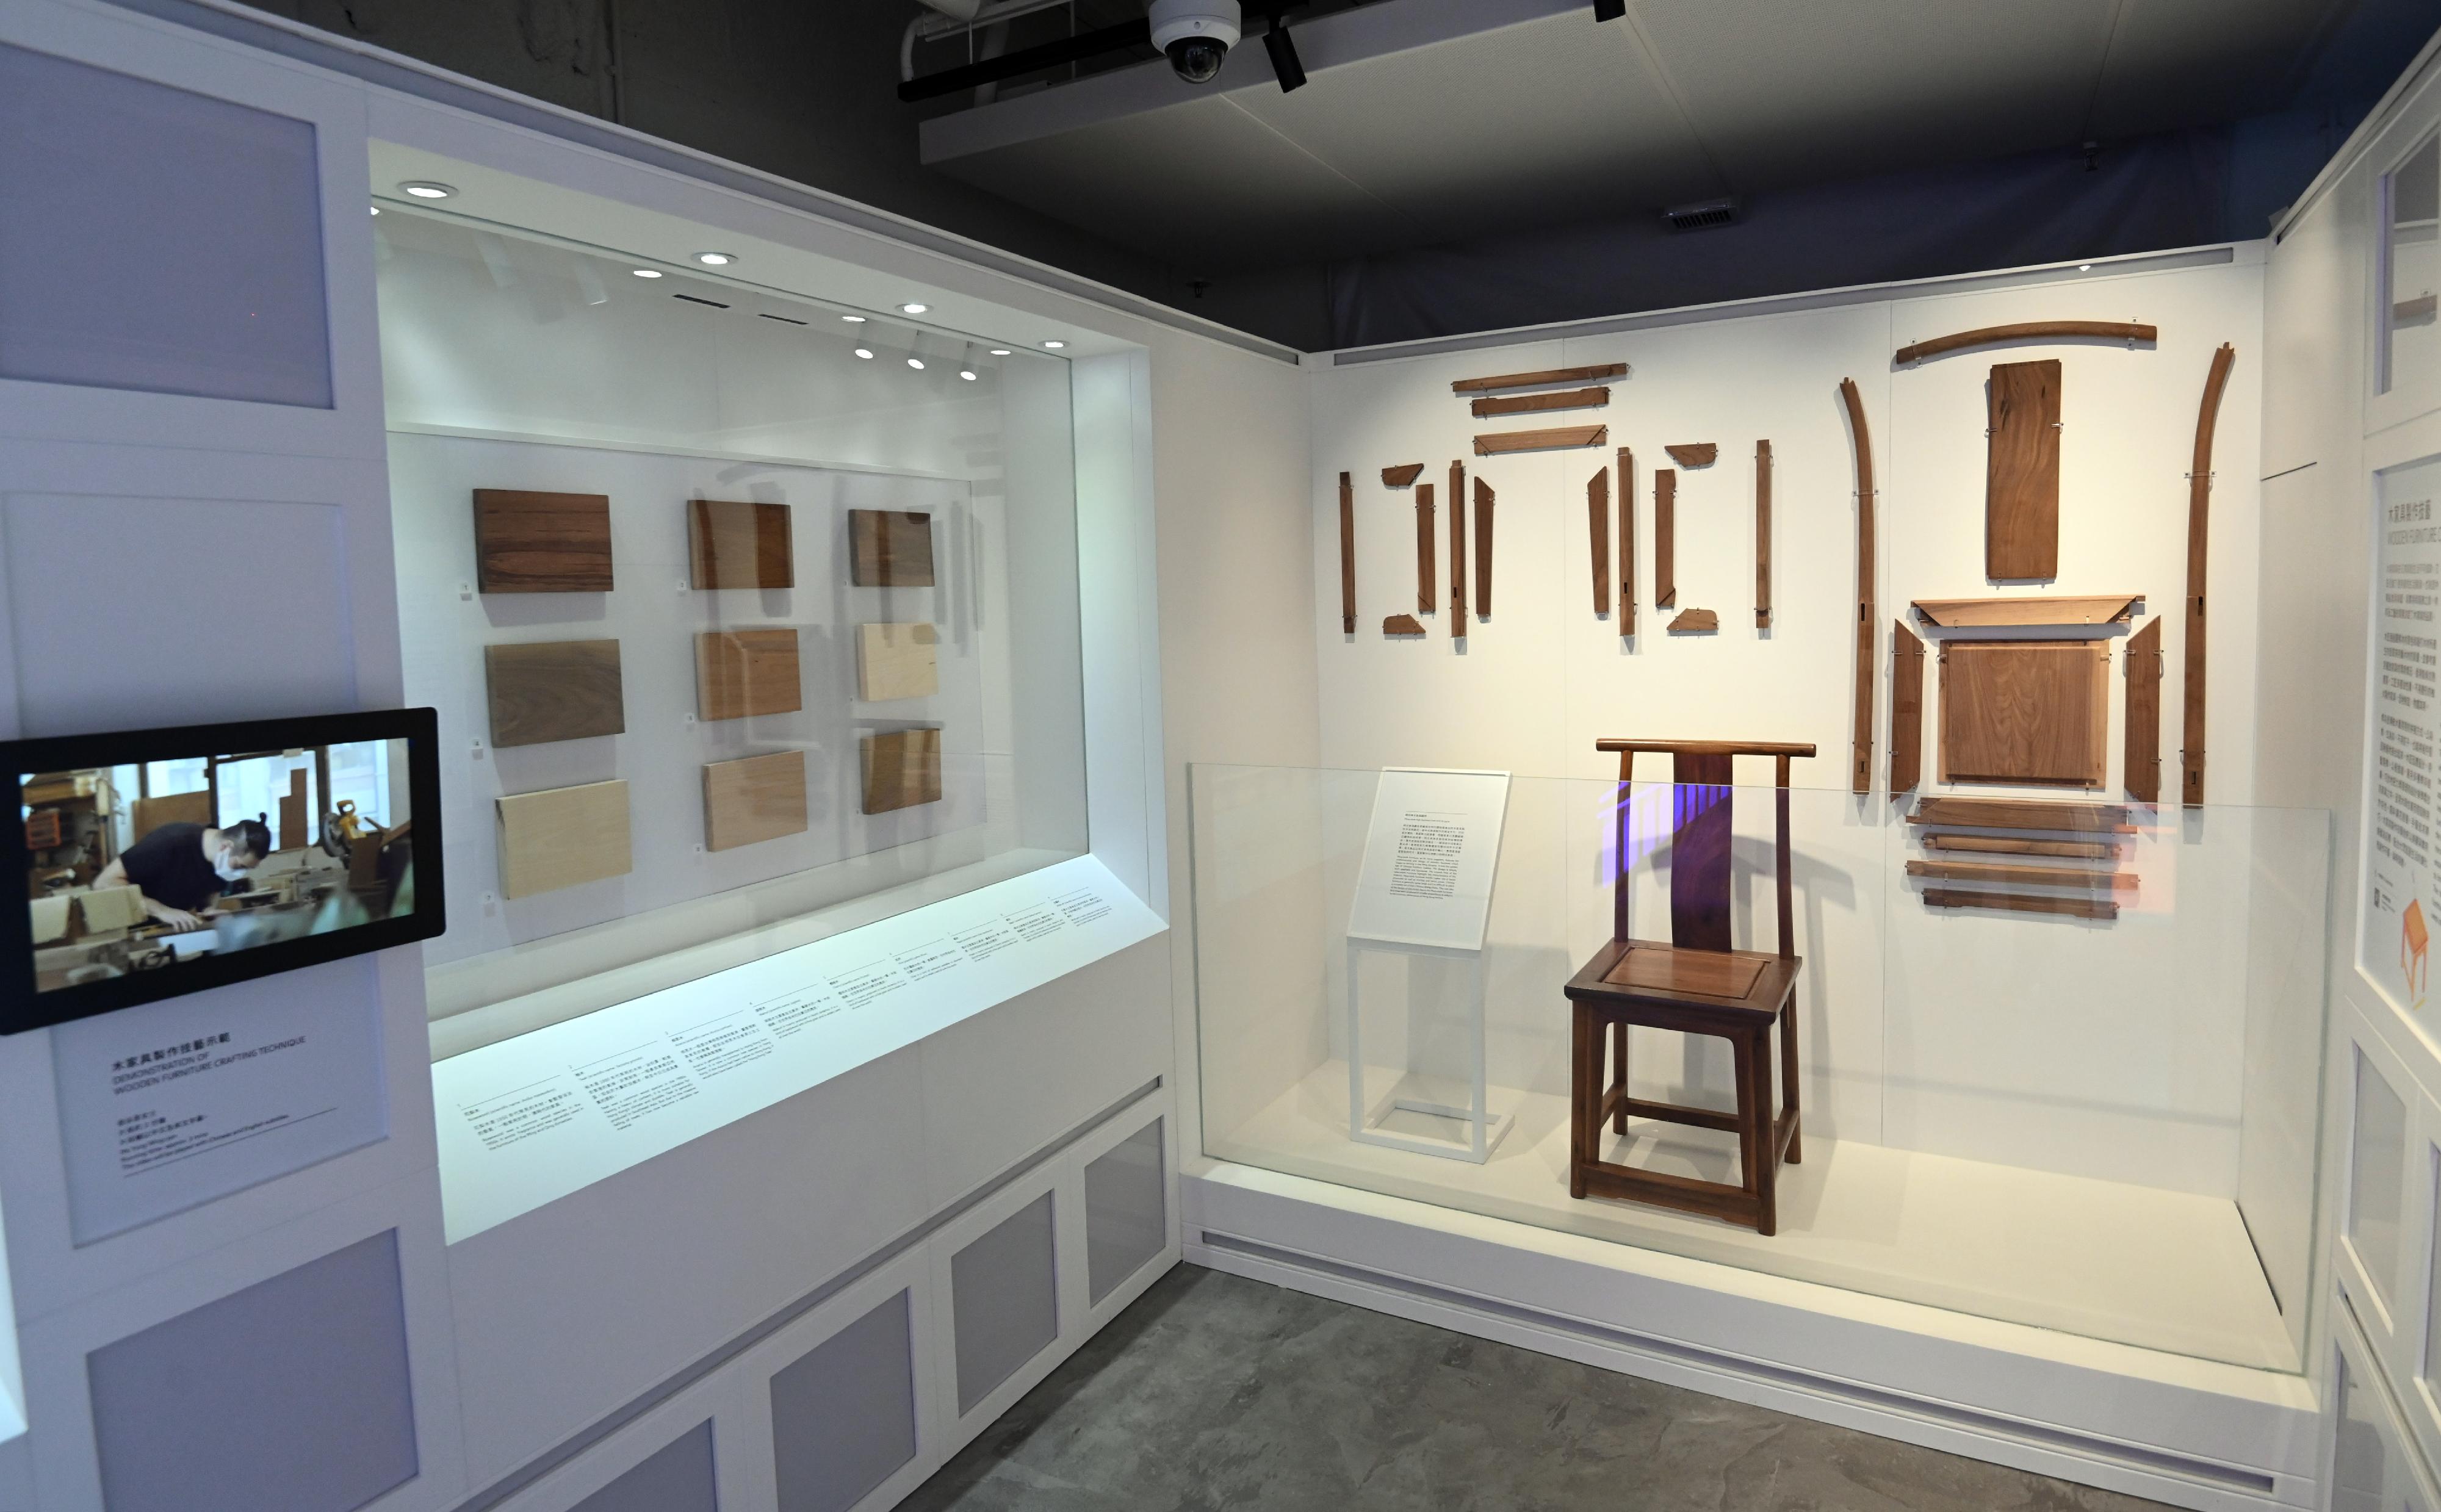 A new exhibition, "Traces of Human Touch", organised by the Intangible Cultural Heritage Office will be open to the public from tomorrow (May 19). Photo shows exhibits of the intangible cultural heritage item, wooden furniture crafting technique.